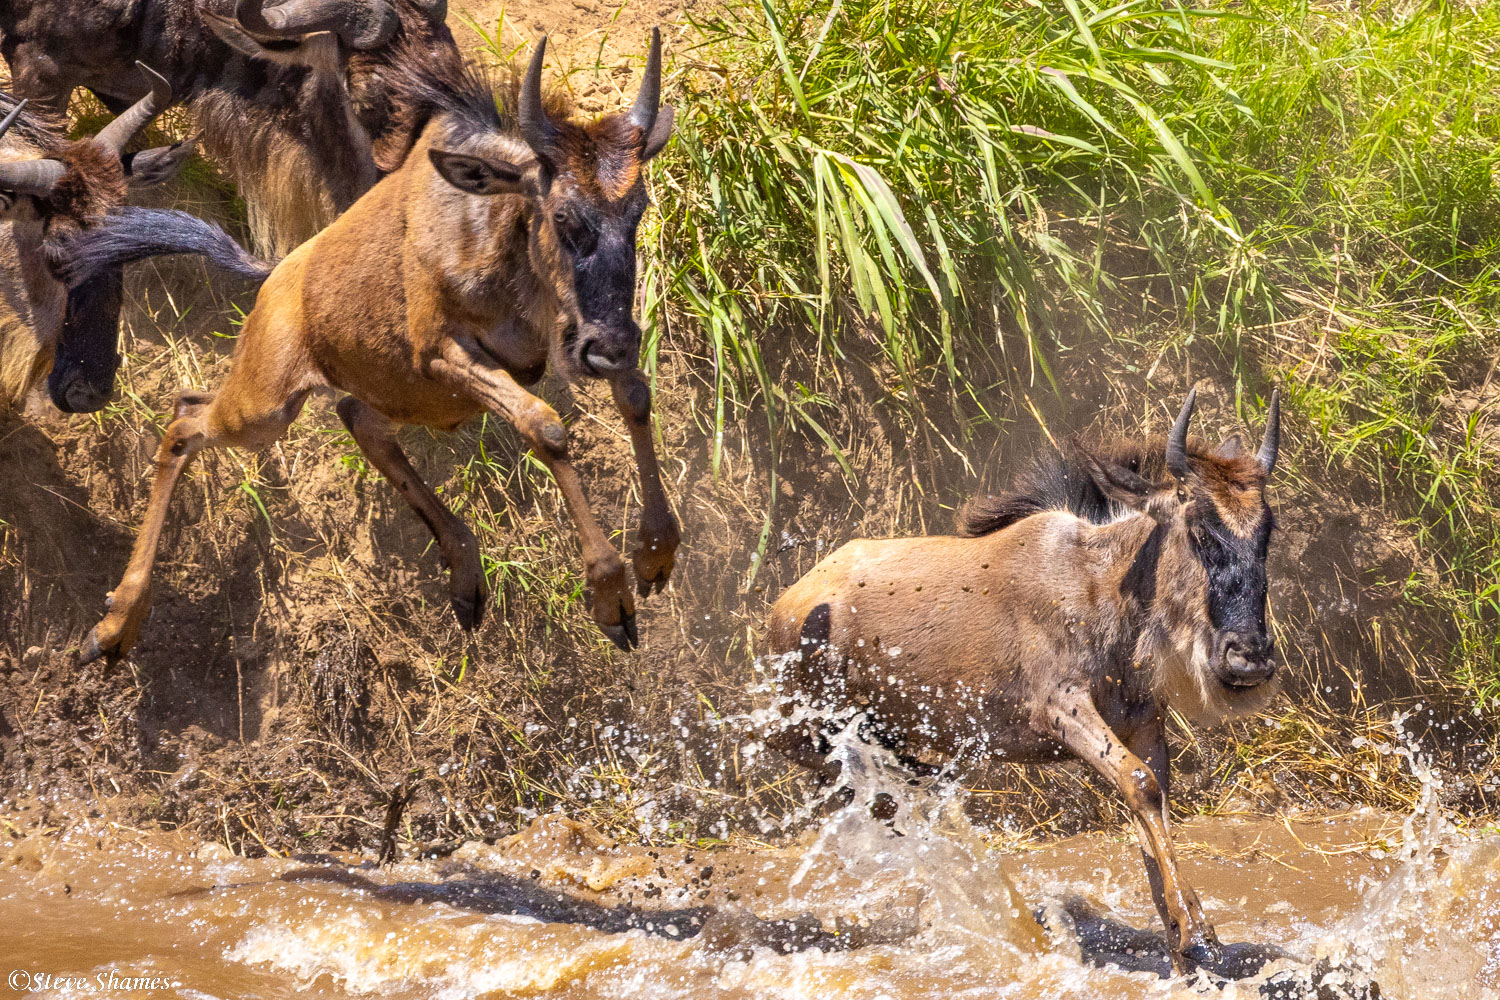 Here is a wildebeest in the air. Jumping into the Mara River.